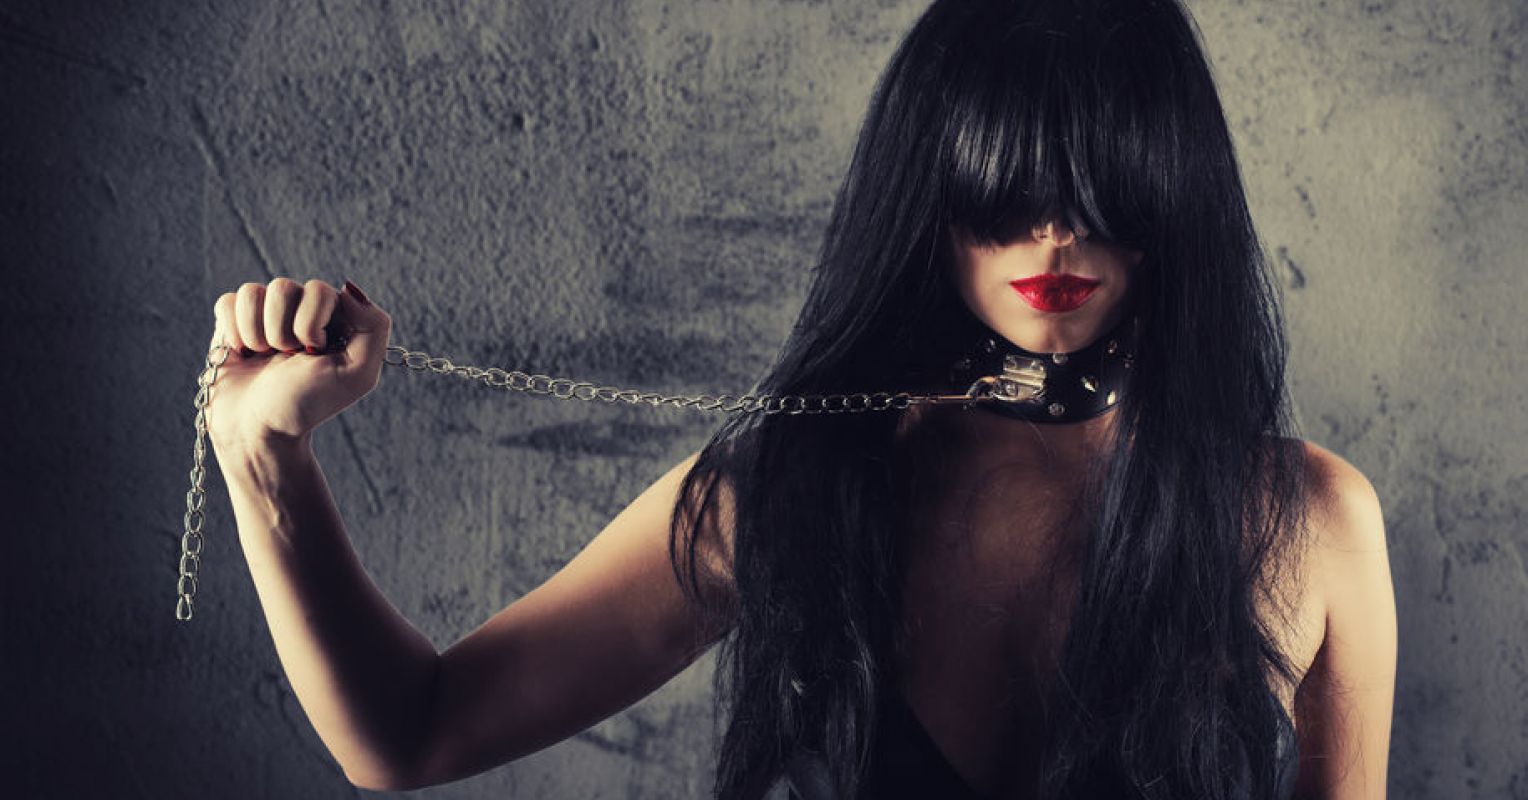 Is BDSM/Kink a Hobby or a Sexual Orientation? Psychology Today pic